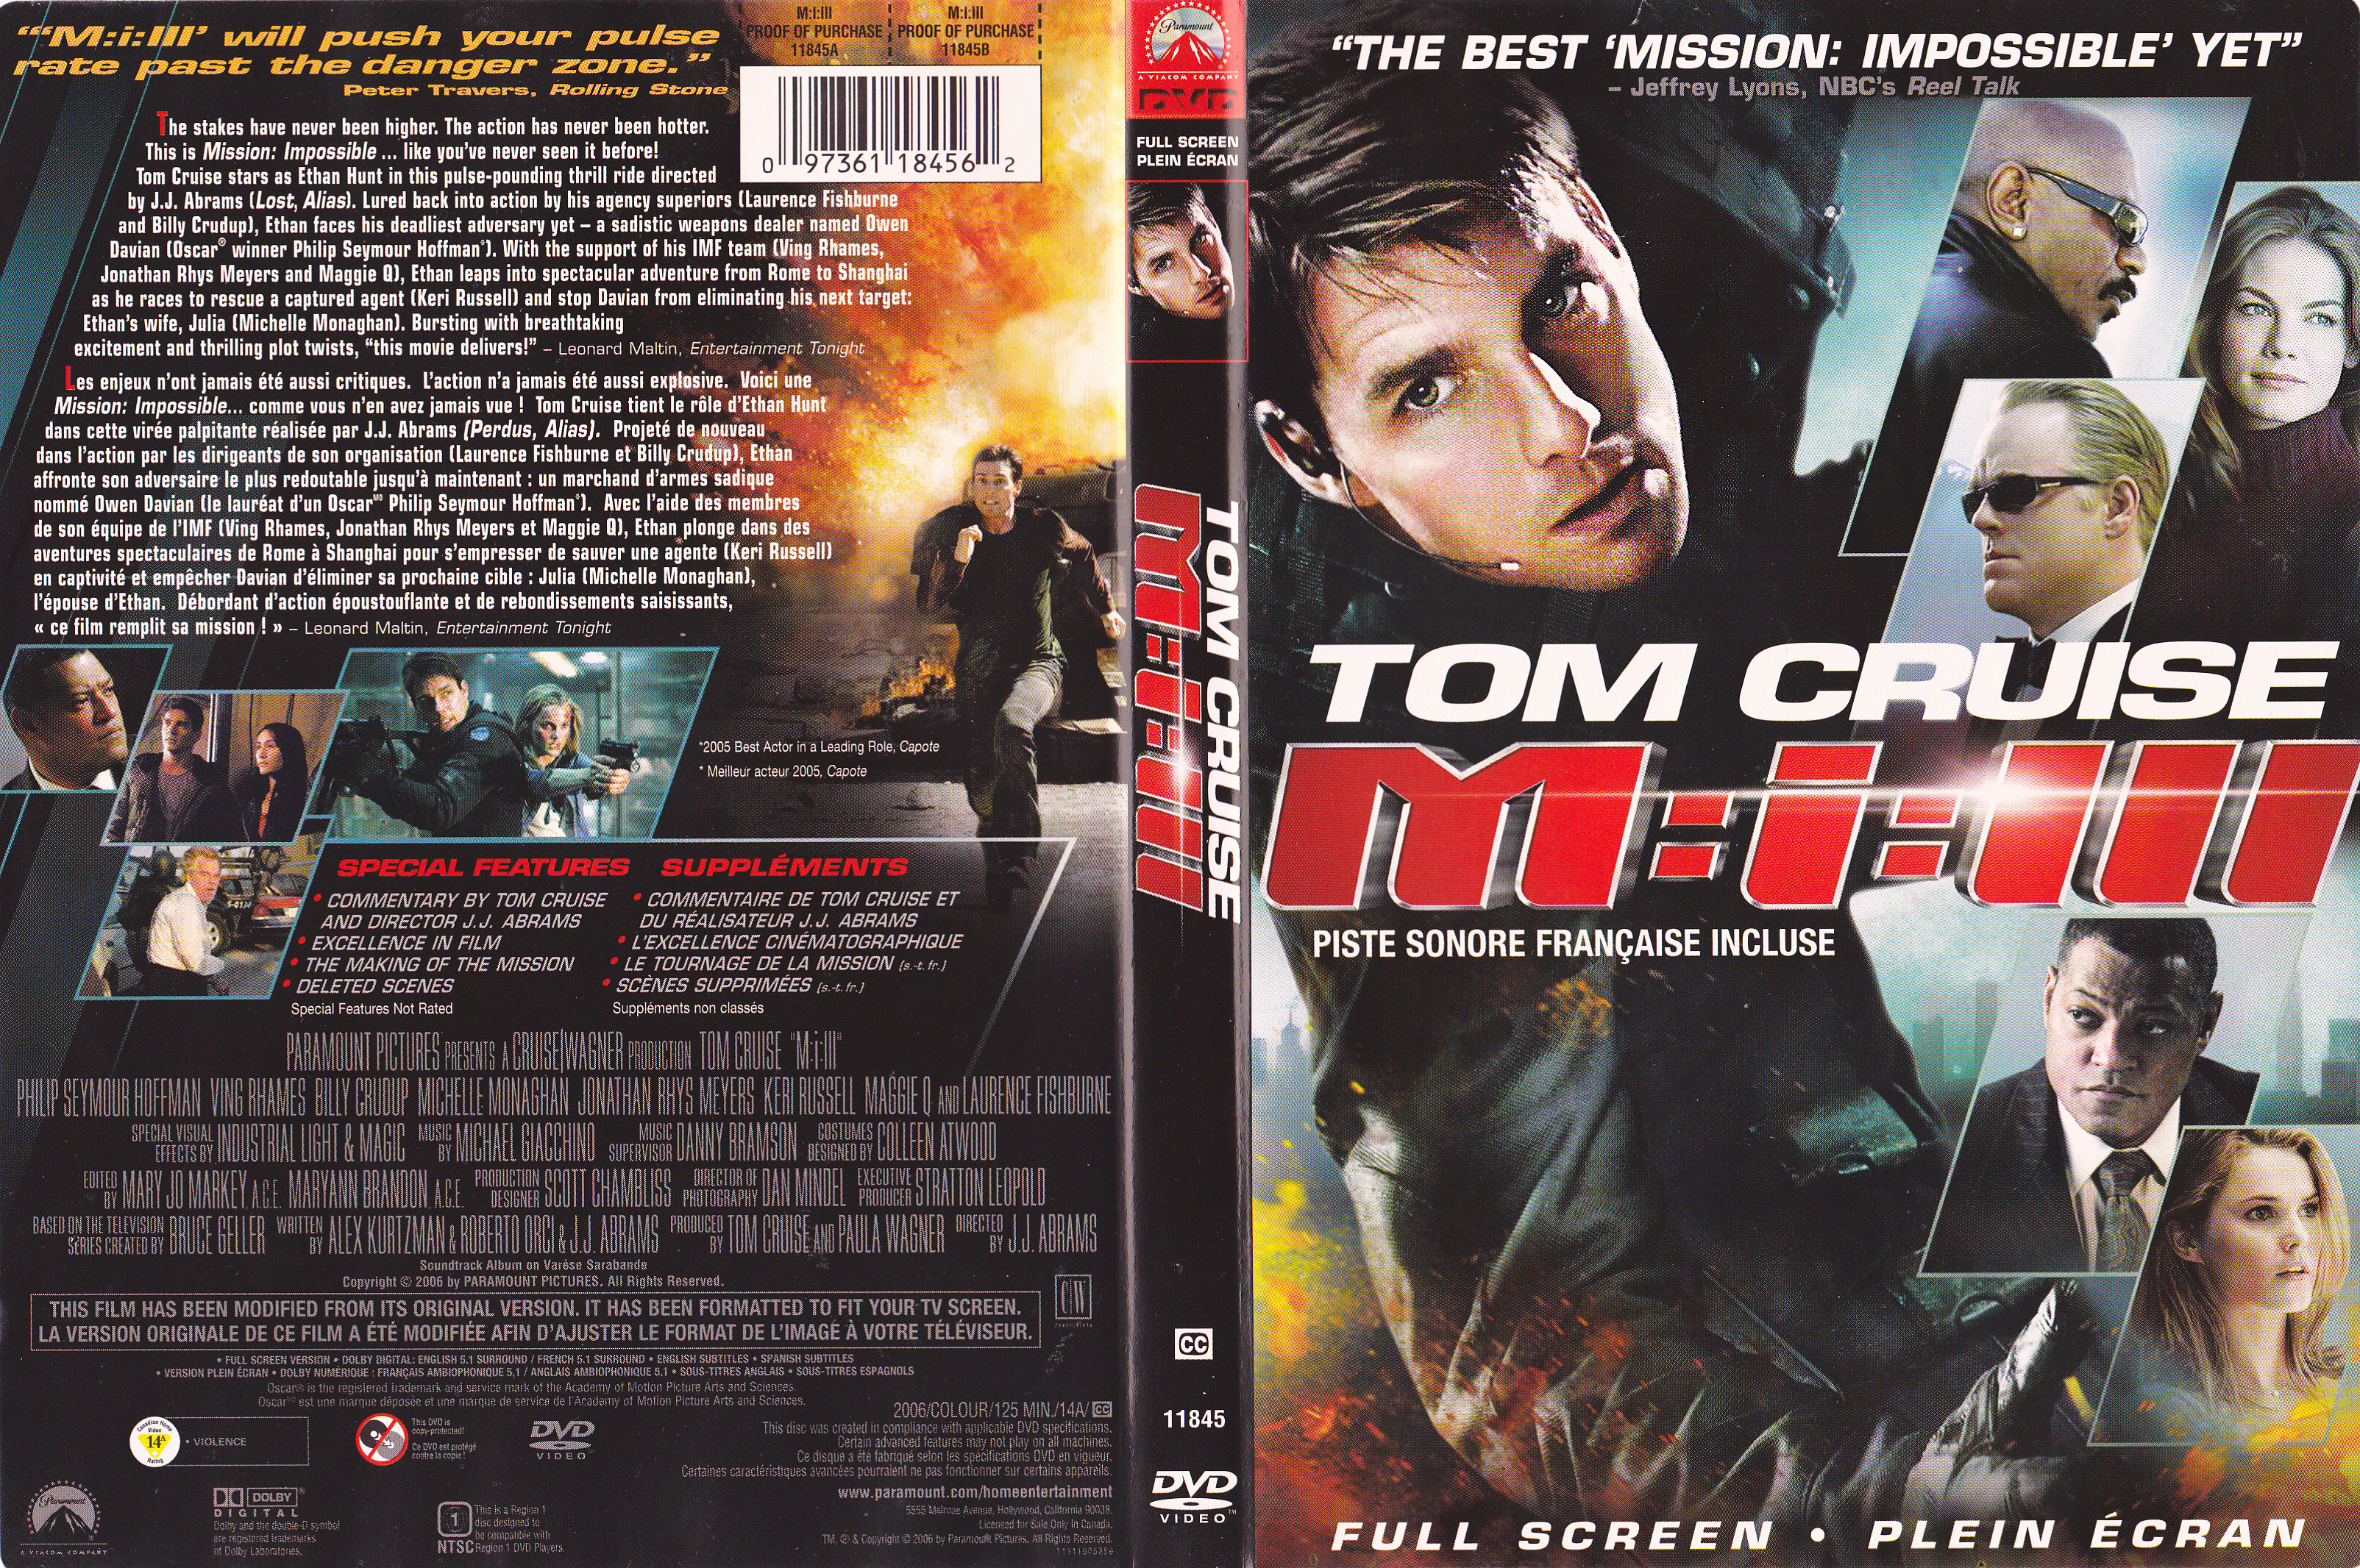 Jaquette DVD Mission Impossible 3 (Canadienne)